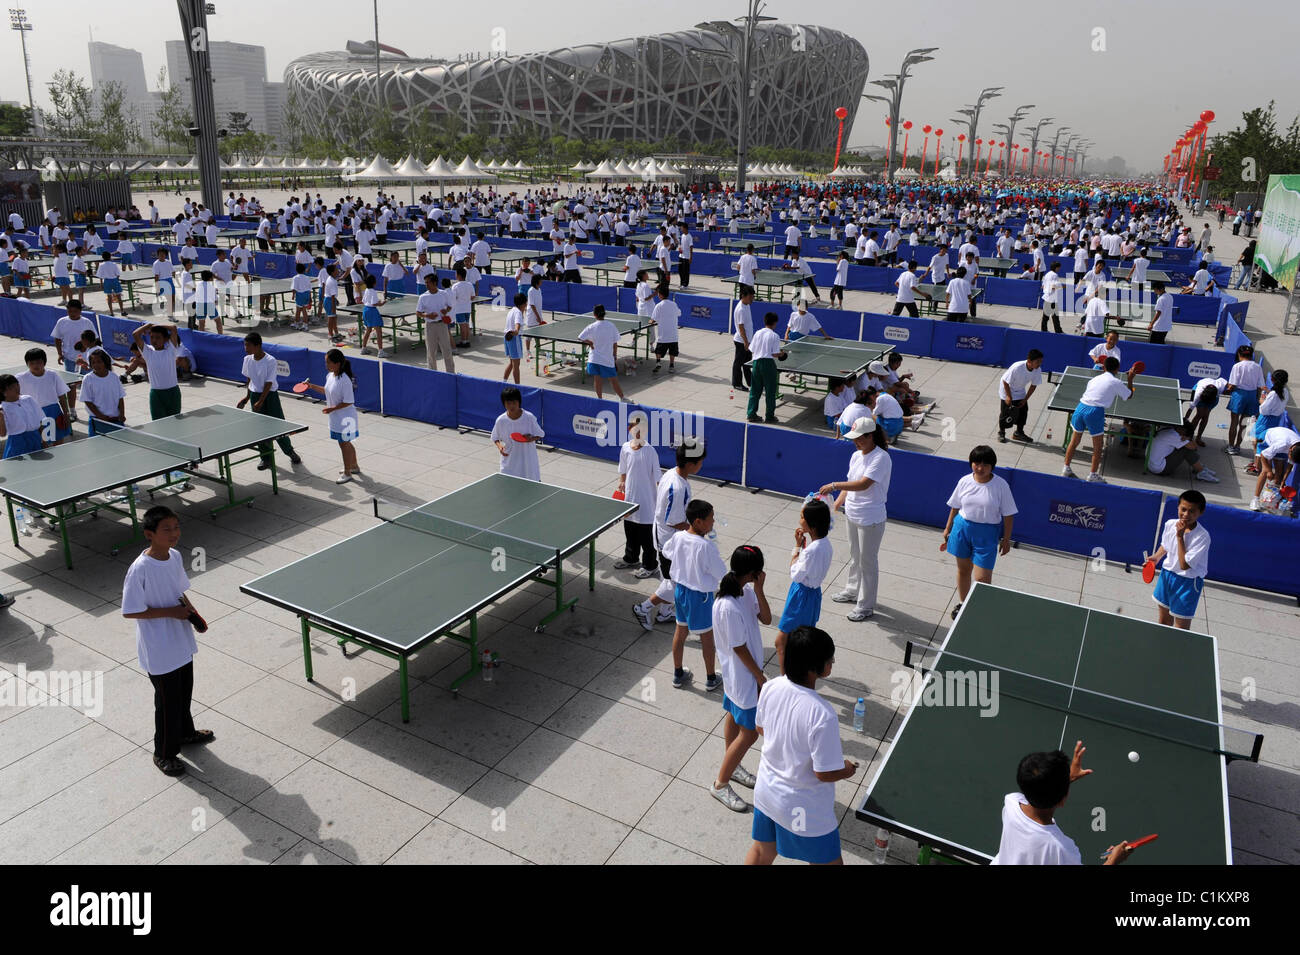 BAT'S JUST CRAZY! Thousands of table tennis fans show their love